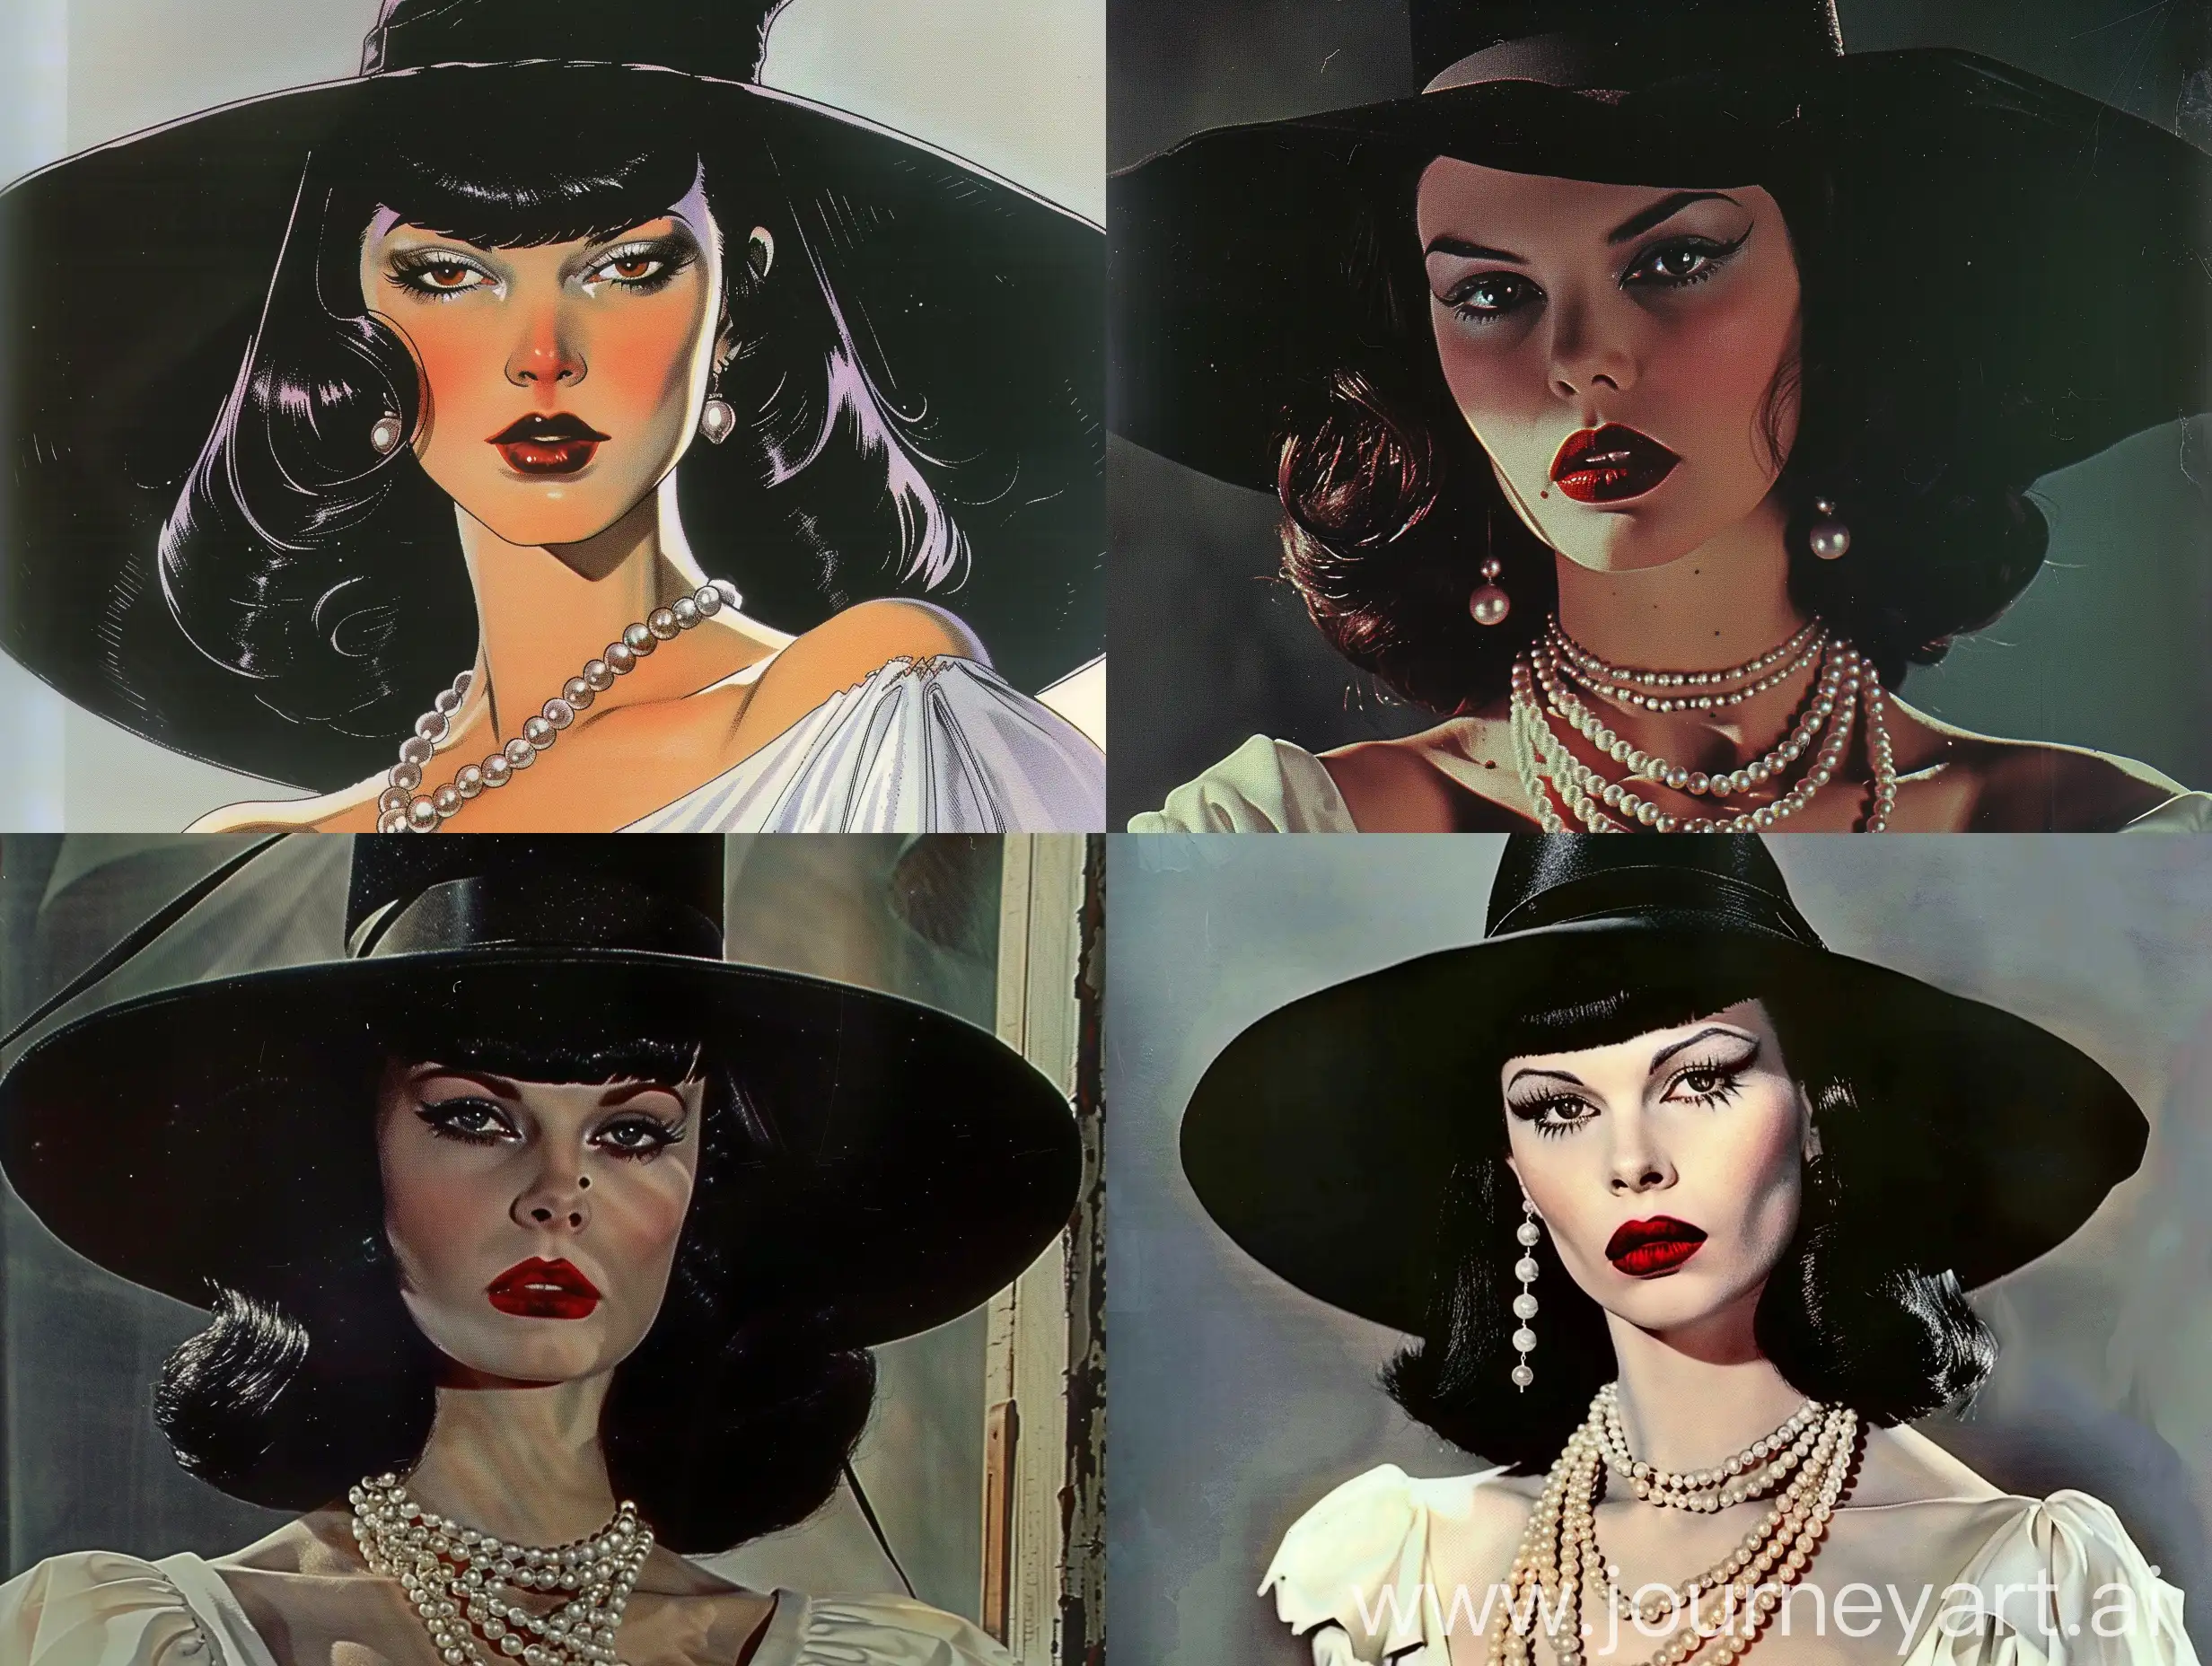 dvd screenshot of Dark Souls fantasy illustration from the 1987s. Artistic illustration of an attractive but morbid-looking gothic woman. She wears make-up with blood-red lipstick, and has neck-length black hair tied up in tight 1950s curls. She has a large black wide-brimmed hat and several pearl necklaces around her neck. She wears a long white dress. Screenshot from the 1987 Dark Souls costume DVD, fantasy book illustration.